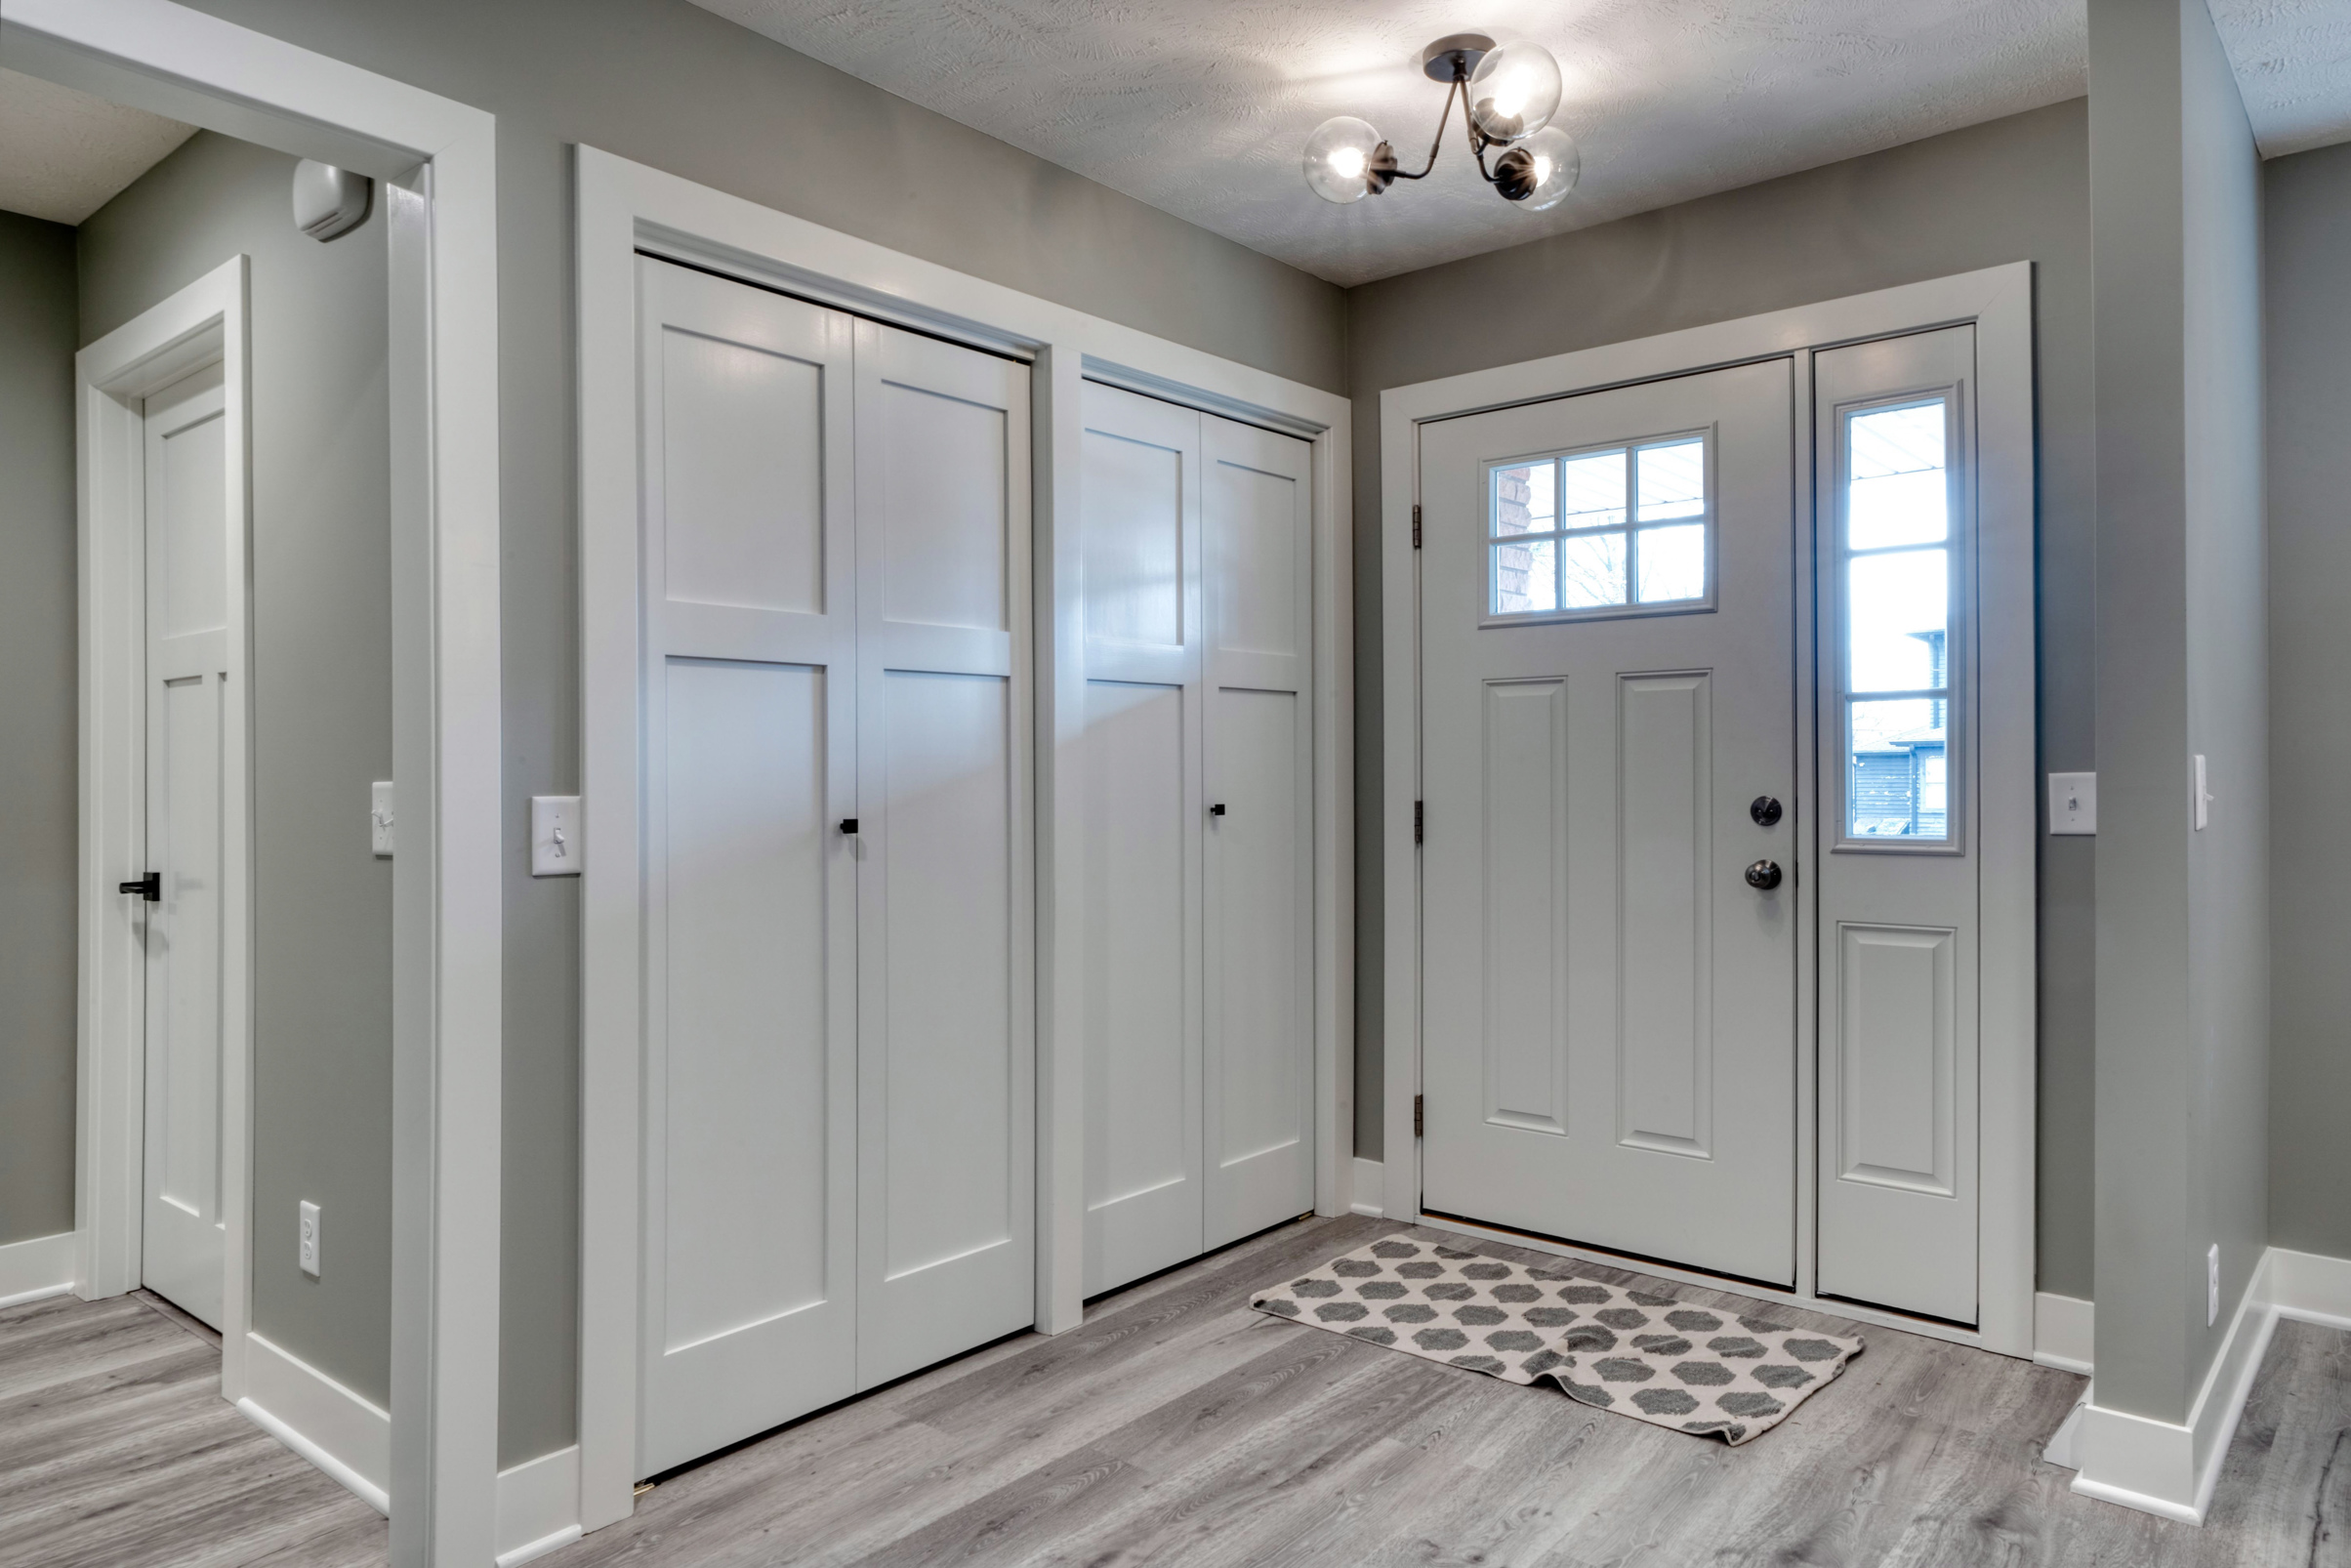 New home entry way with floor to ceiling closets